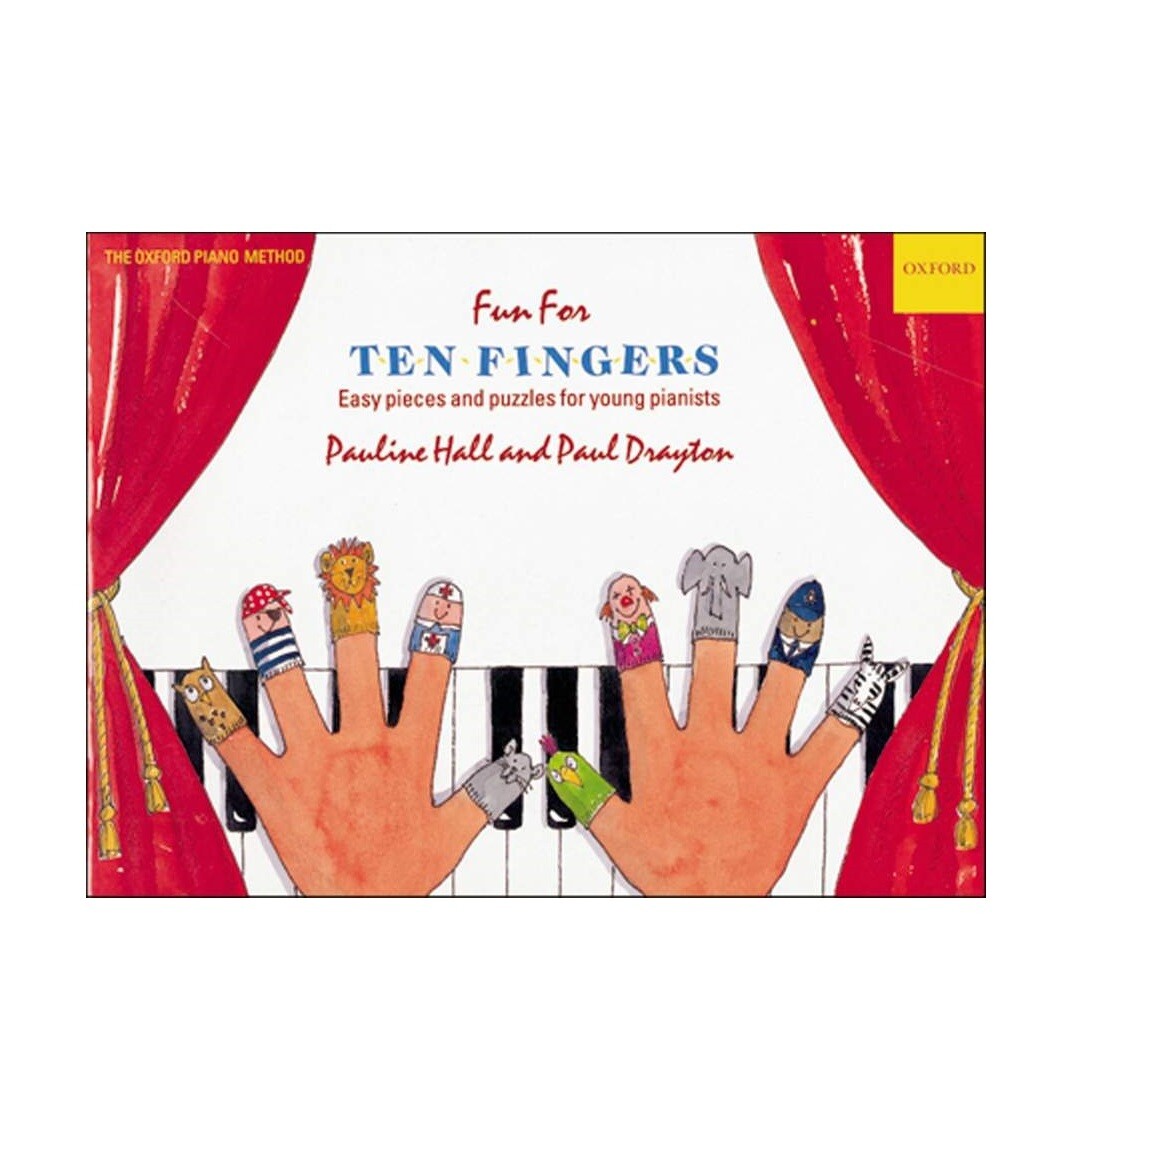 Fun For Ten Fingers - Easy Pieces and Puzzles for Young Pianists